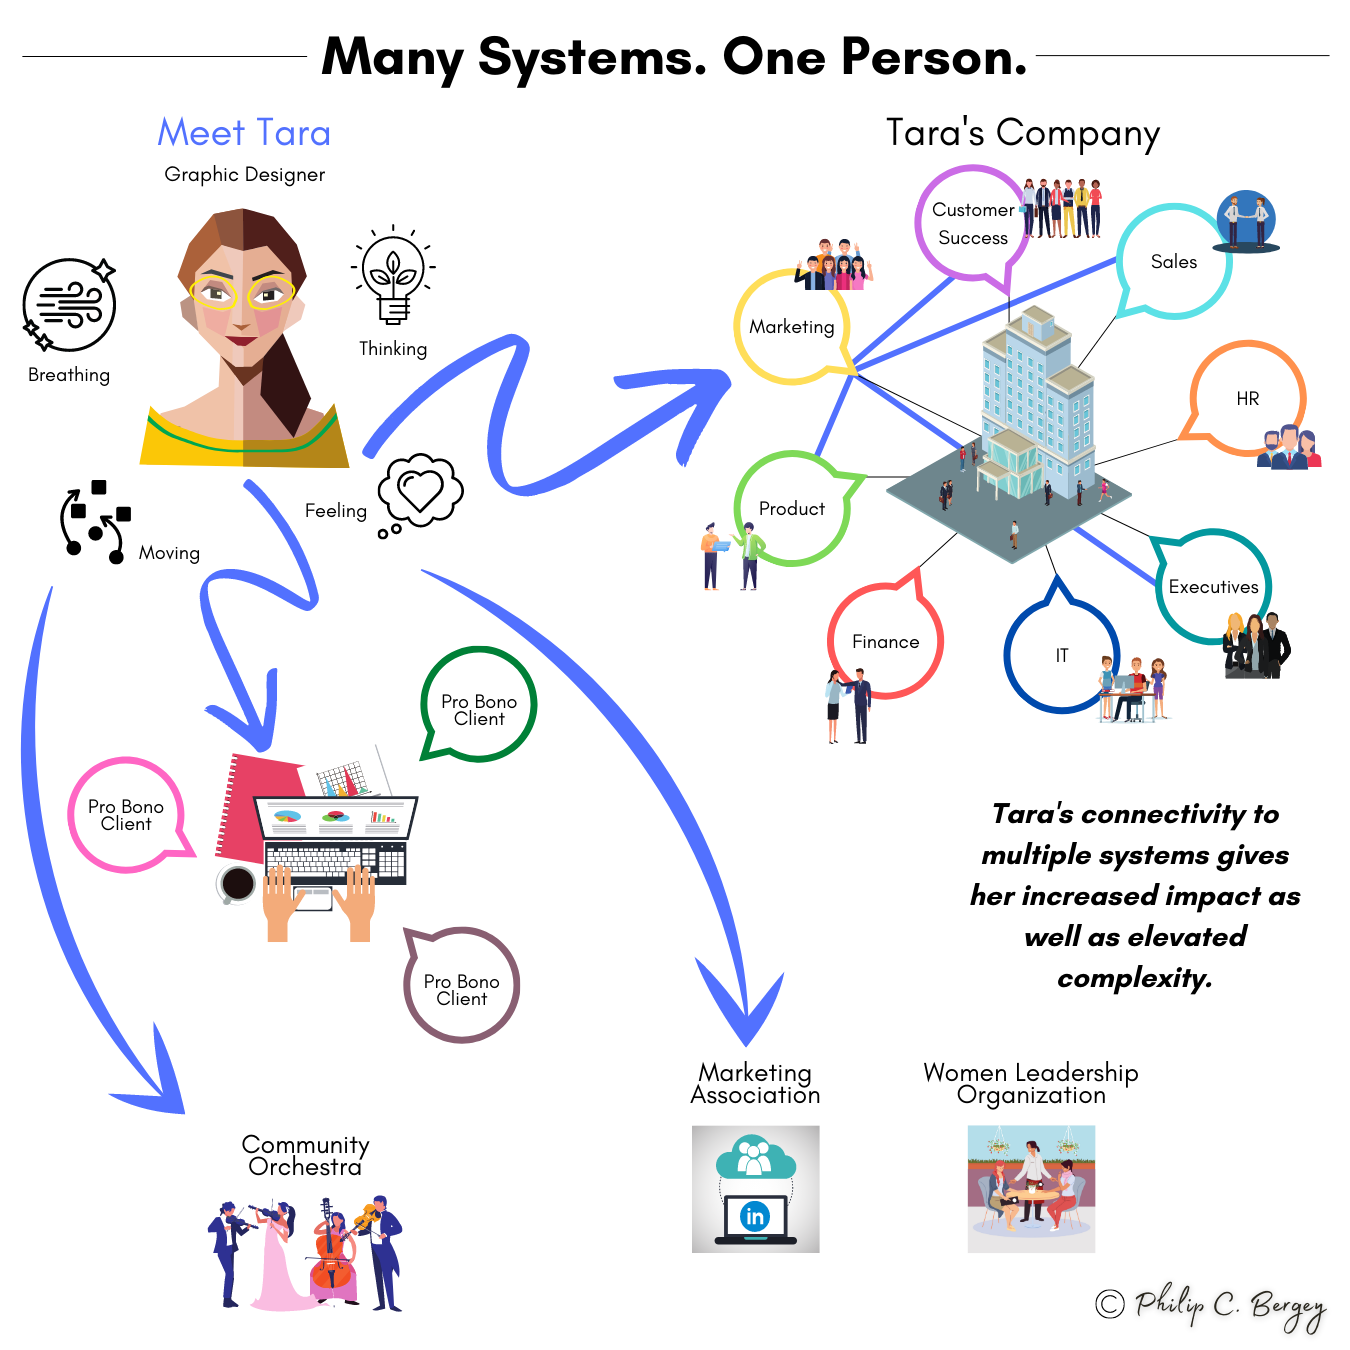 Phil Bergey - Meet Tara - Many Systems. One Person. Infographic